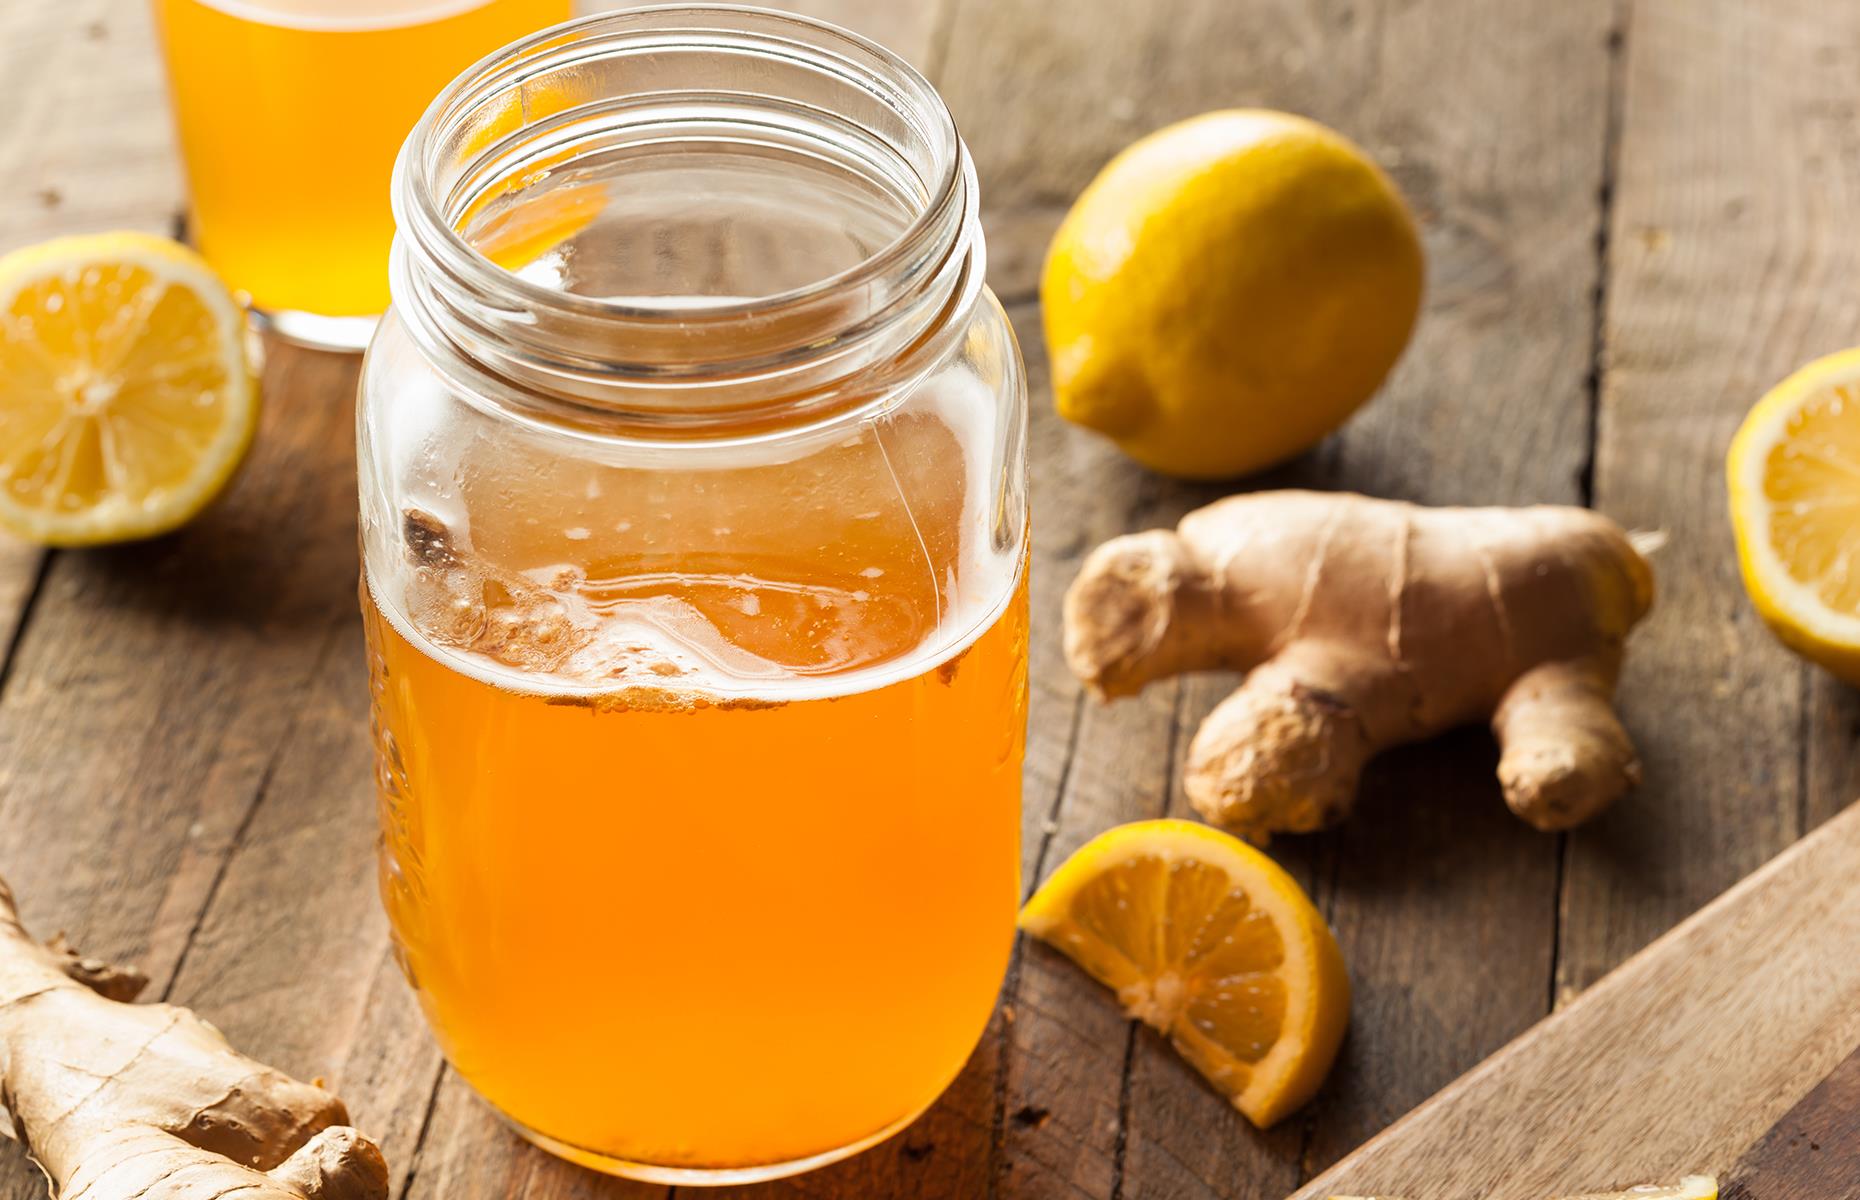 <p>Revered by health-conscious millennials, kombucha, a fermented tea drink that's celebrated for its gut-friendly properties, has skyrocketed in popularity in recent years. But folks have been celebrating the merits of this trendy beverage long before the modern day. Most people <a href="https://www.forbes.com/sites/christinatroitino/2017/02/01/kombucha-101-demystifying-the-past-present-and-future-of-the-fermented-tea-drink/?sh=5f3b70f4ae24">pin its origins to Northeast China</a>, or ancient Manchuria, where it's thought that the drink was first brewed as early as 220 BC, before being brought to other parts of Asia and eventually Europe too.</p>